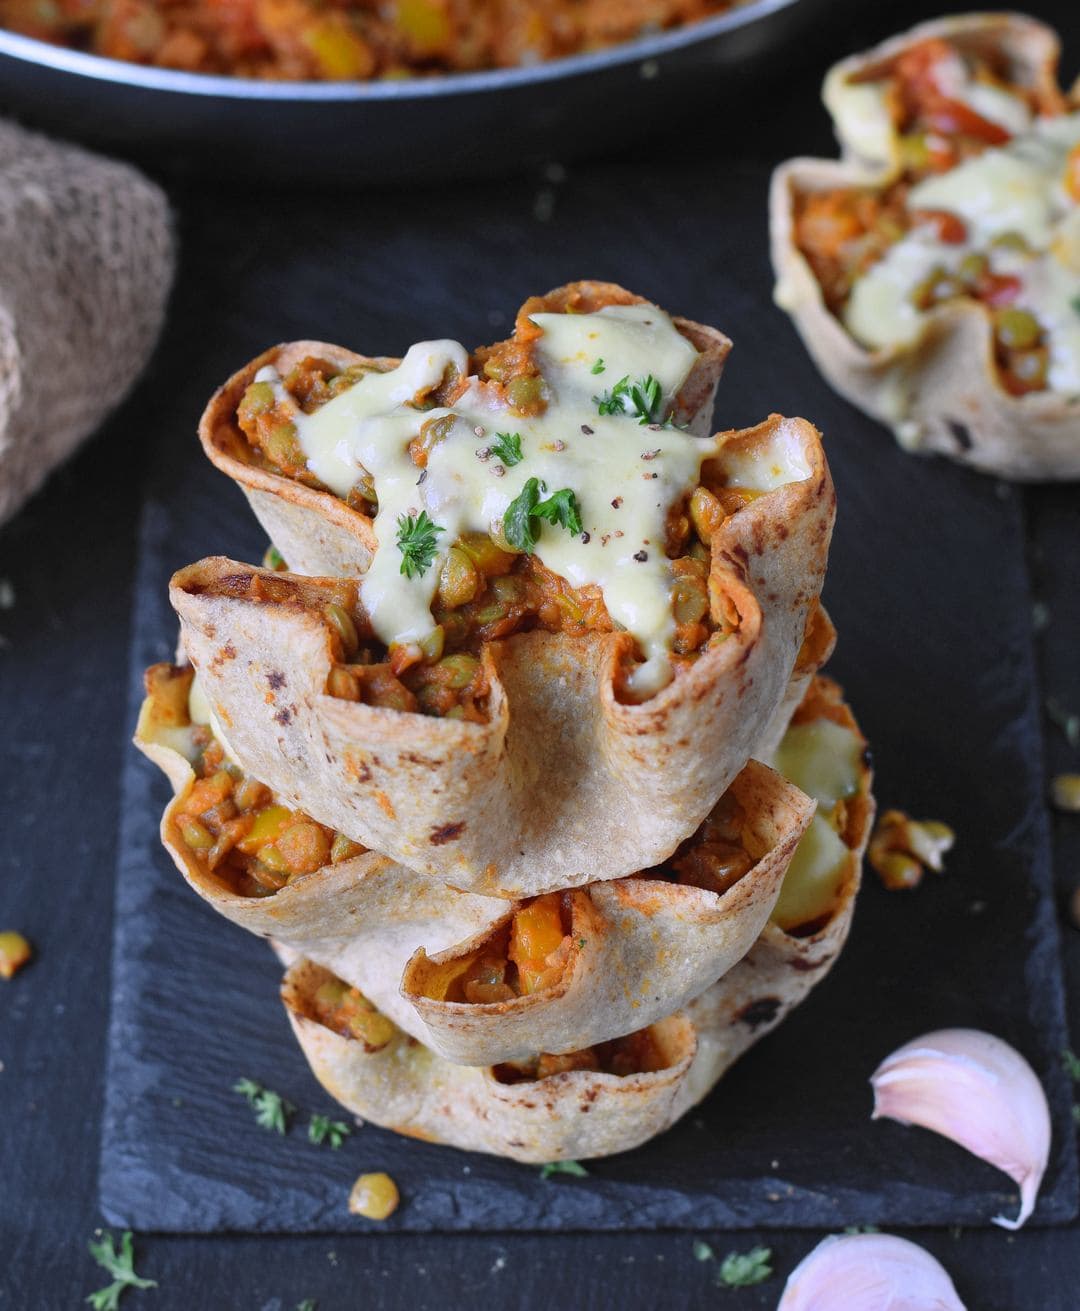 A stack of three homemade tortilla bowls filled with lentil veggie mixture and vegan cheese sauce